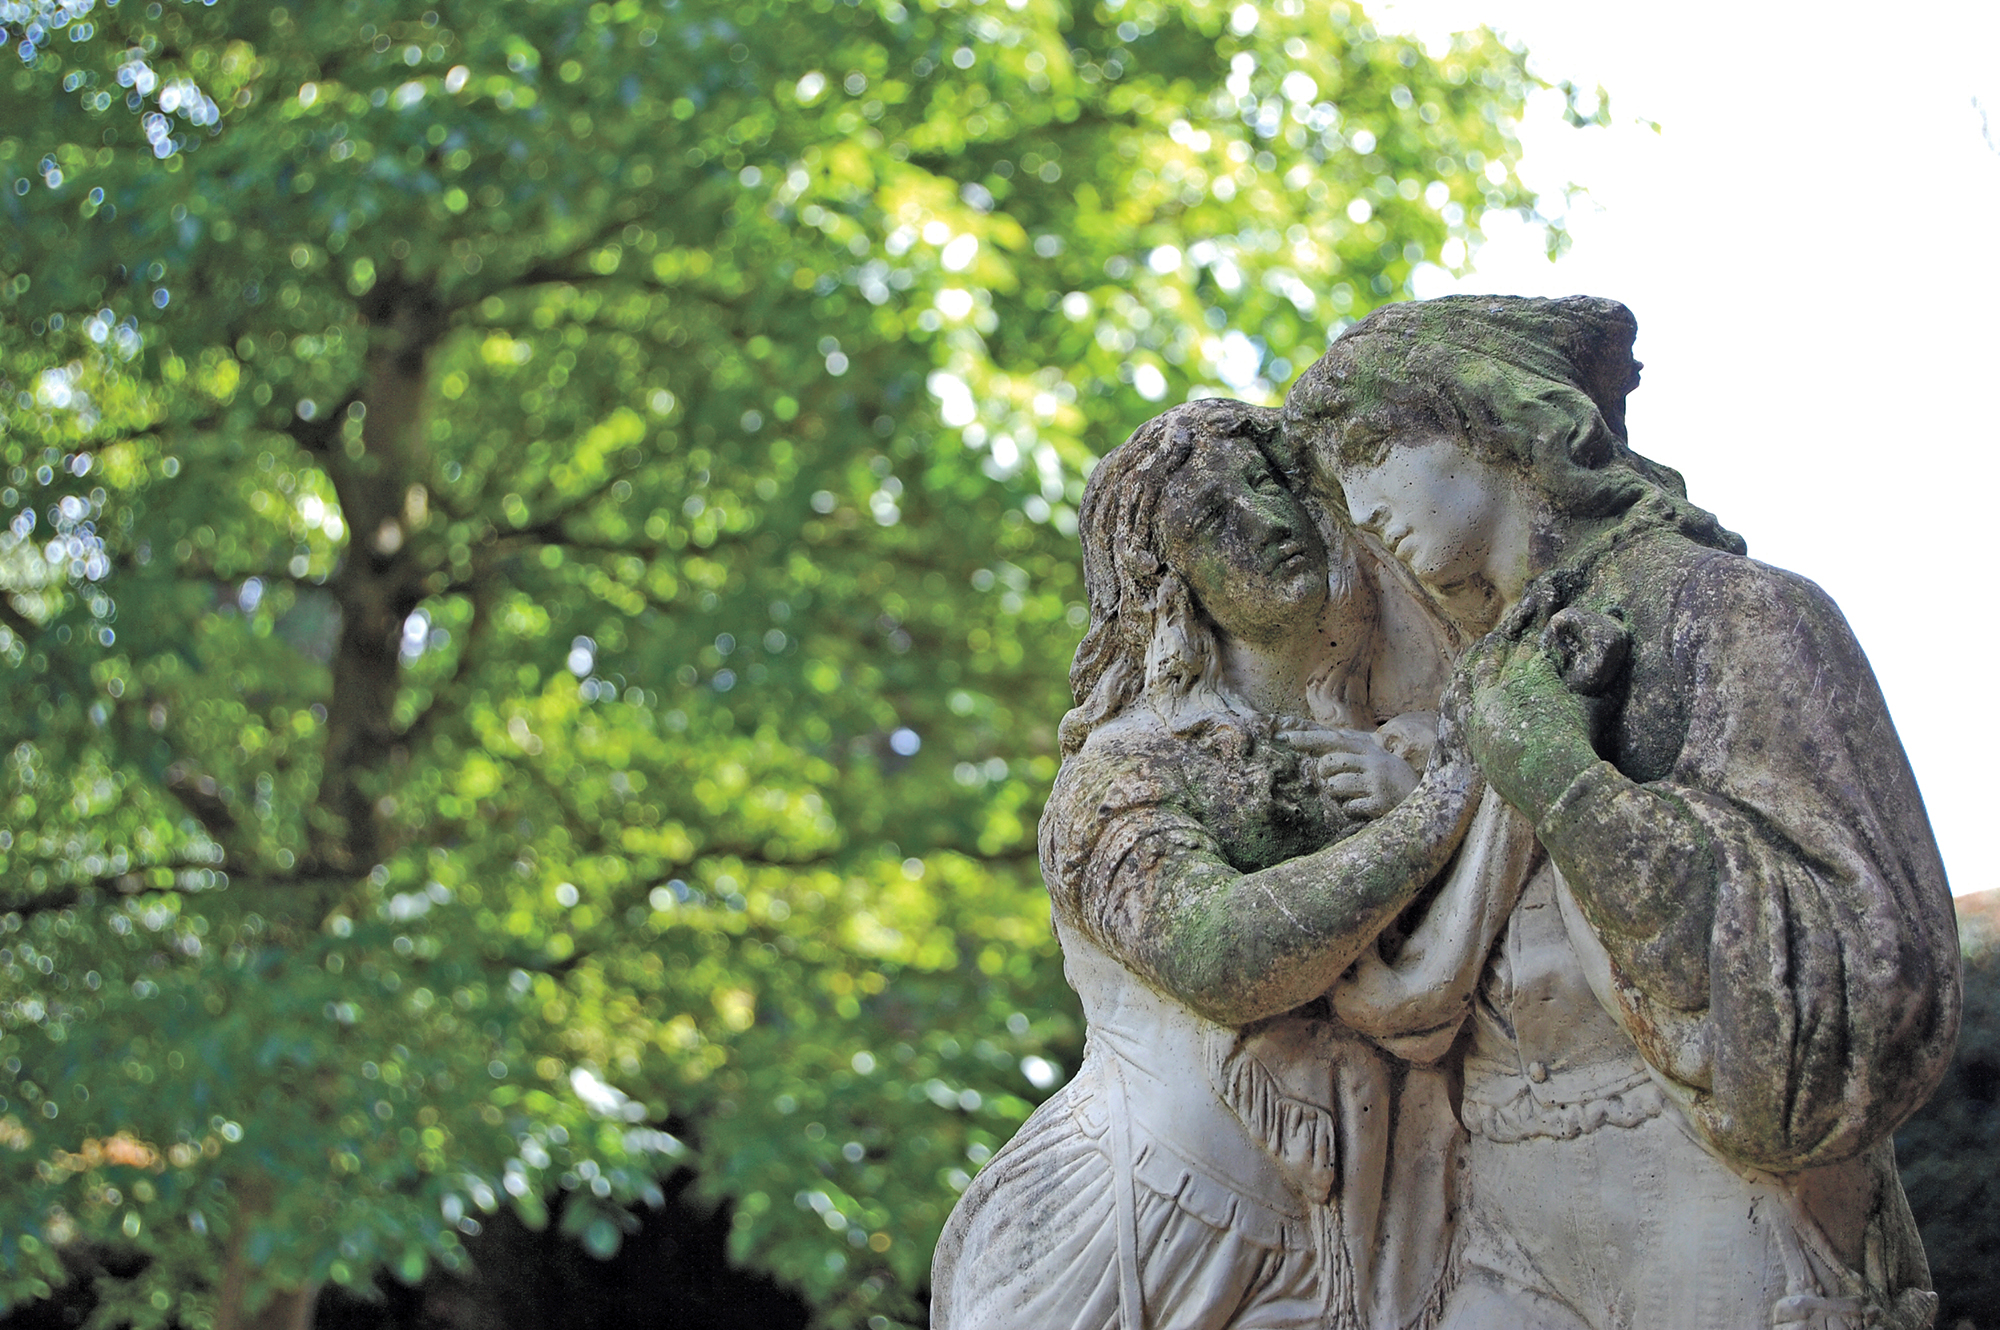 A sculpture of the lovers Romeo and Juliet, displayed in a Wroxton garden.